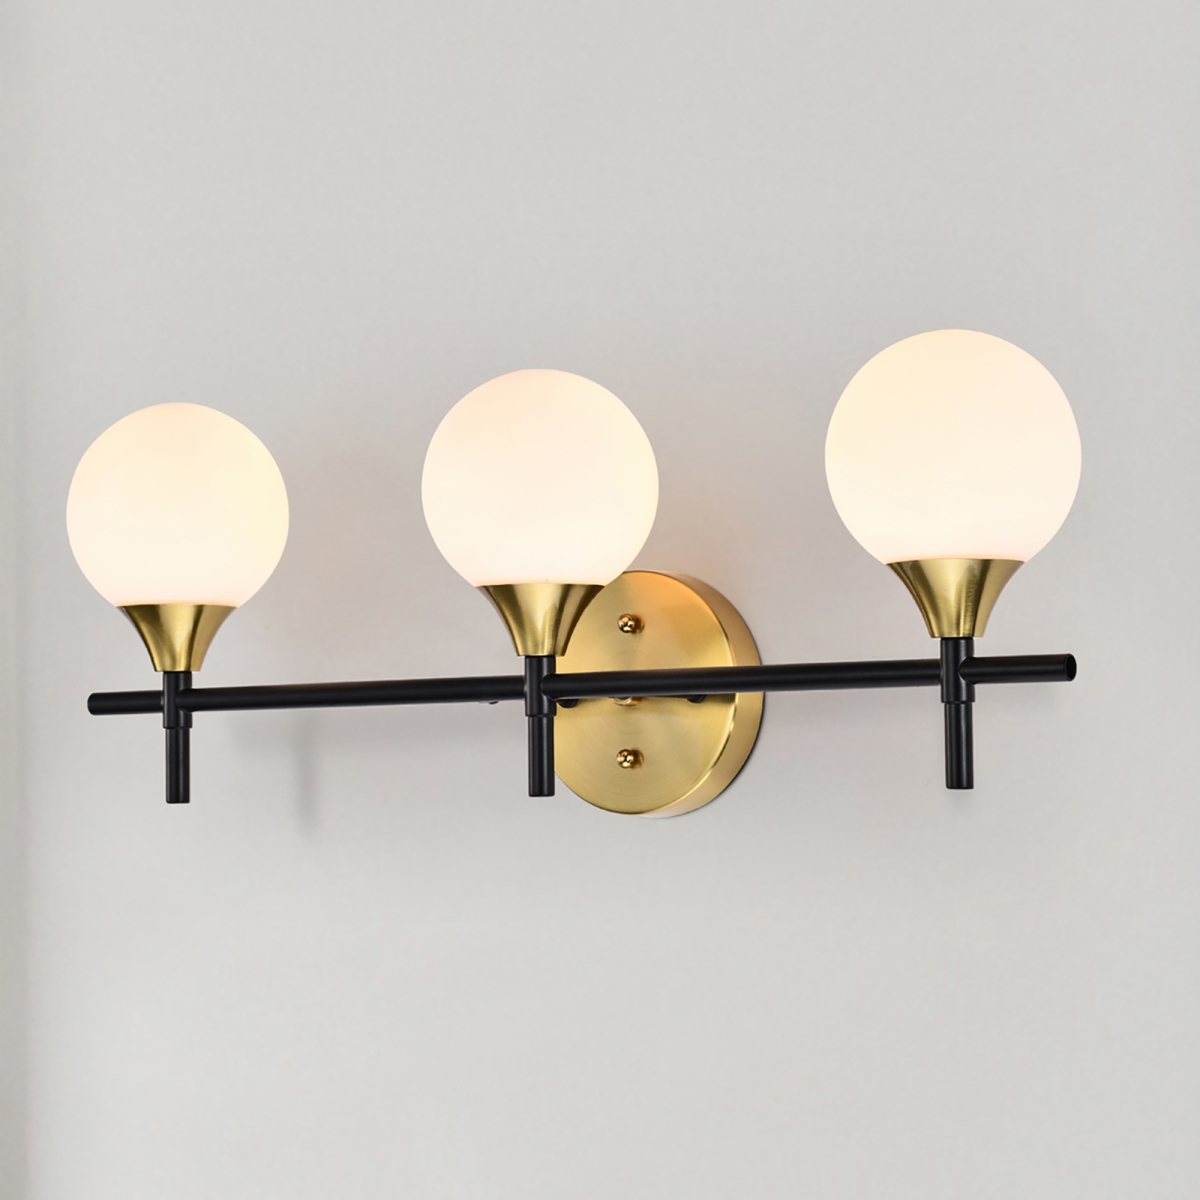 Aeneas 17 in. 3-Light Indoor Matte Black and Brass Finish Wall Sconce with Light Kit